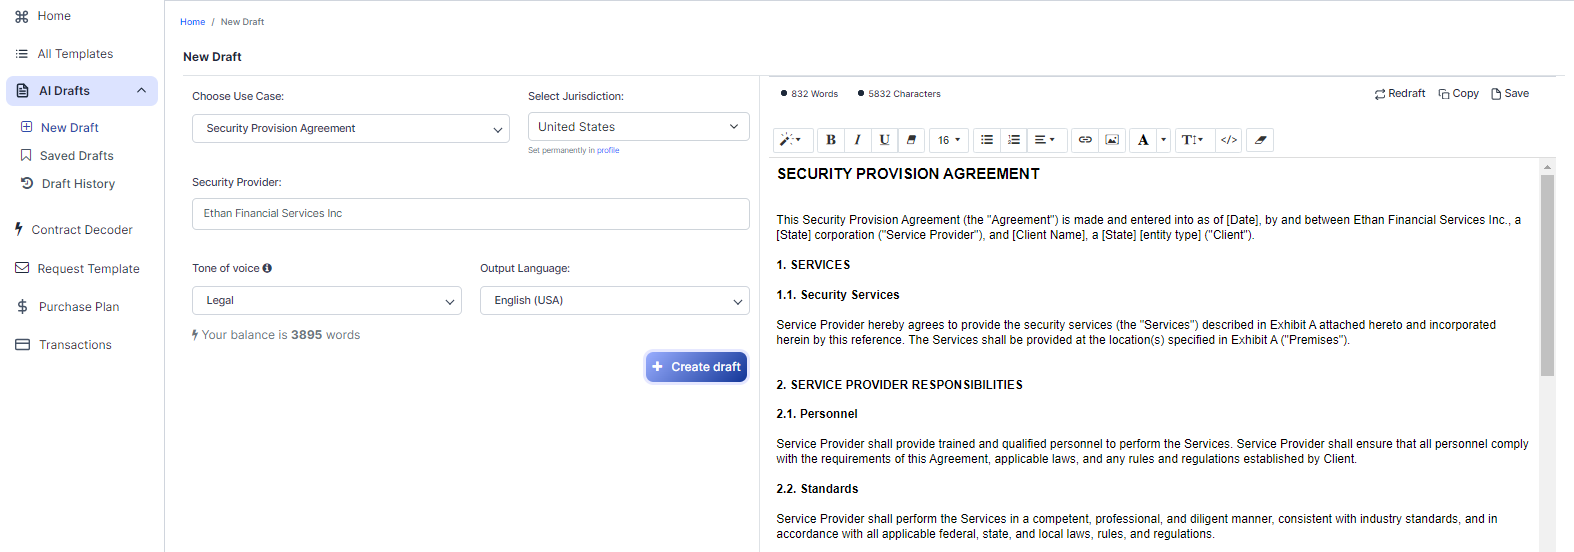 Security Provision Agreement template